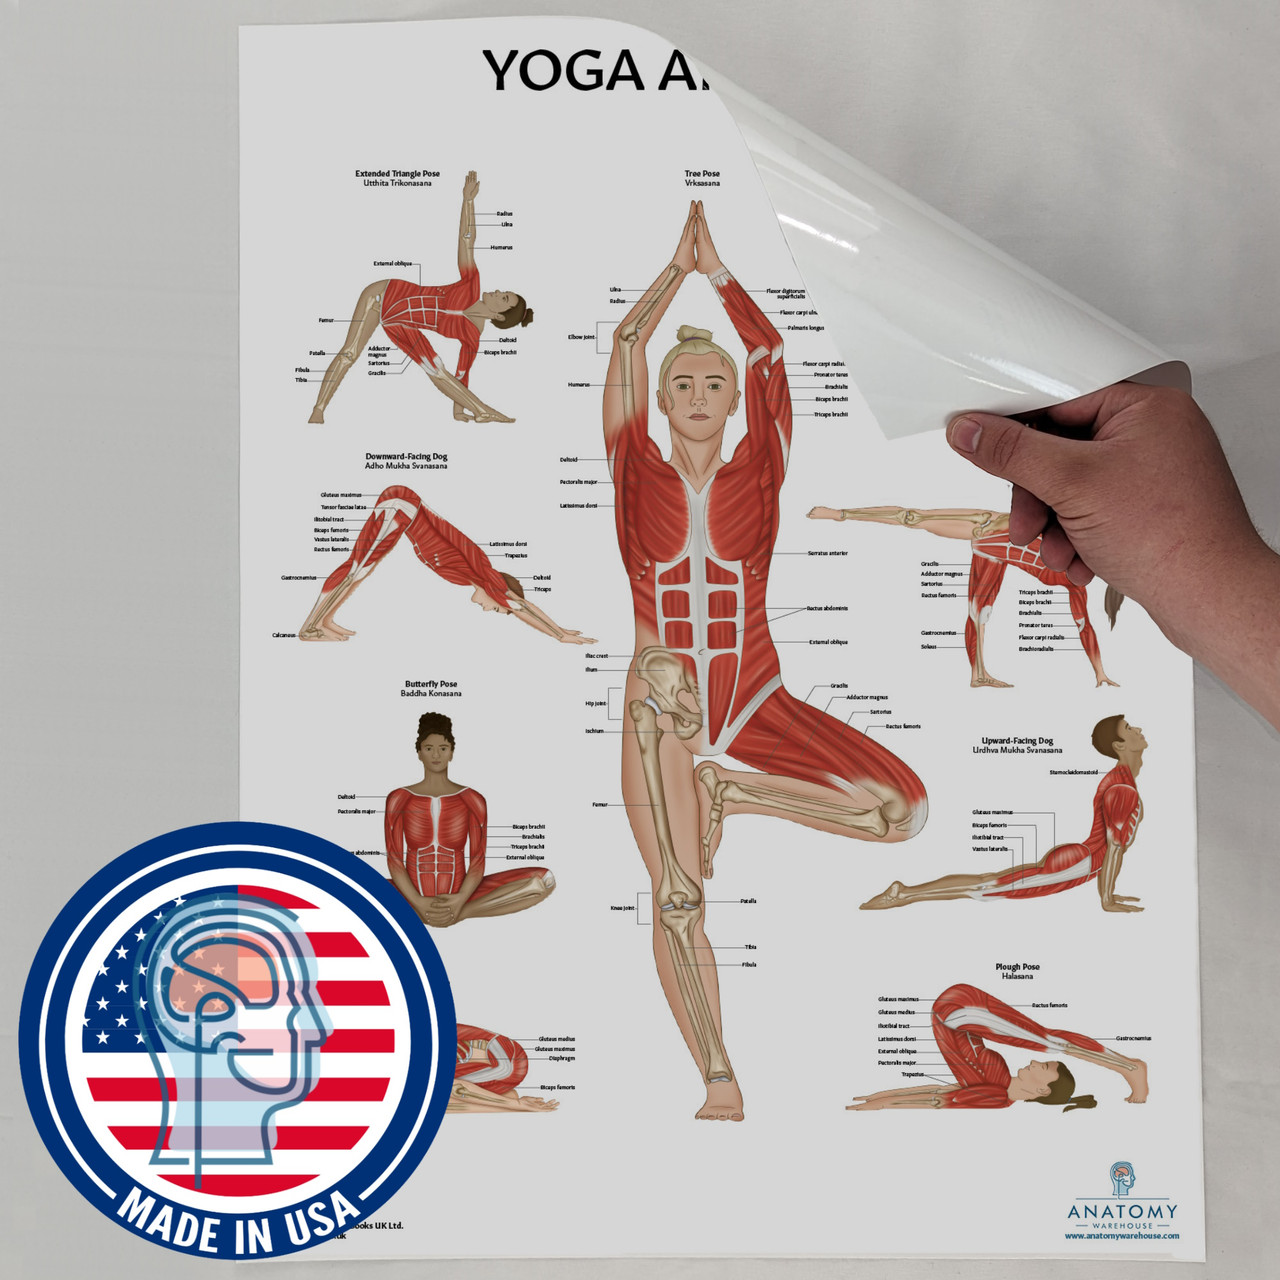 Amazon.com: Wall Art Yoga Poses Premium Poster Print Great Gift Idea for  Her or Him Hanging Picture Decor For Home or Room (8x12): Posters & Prints